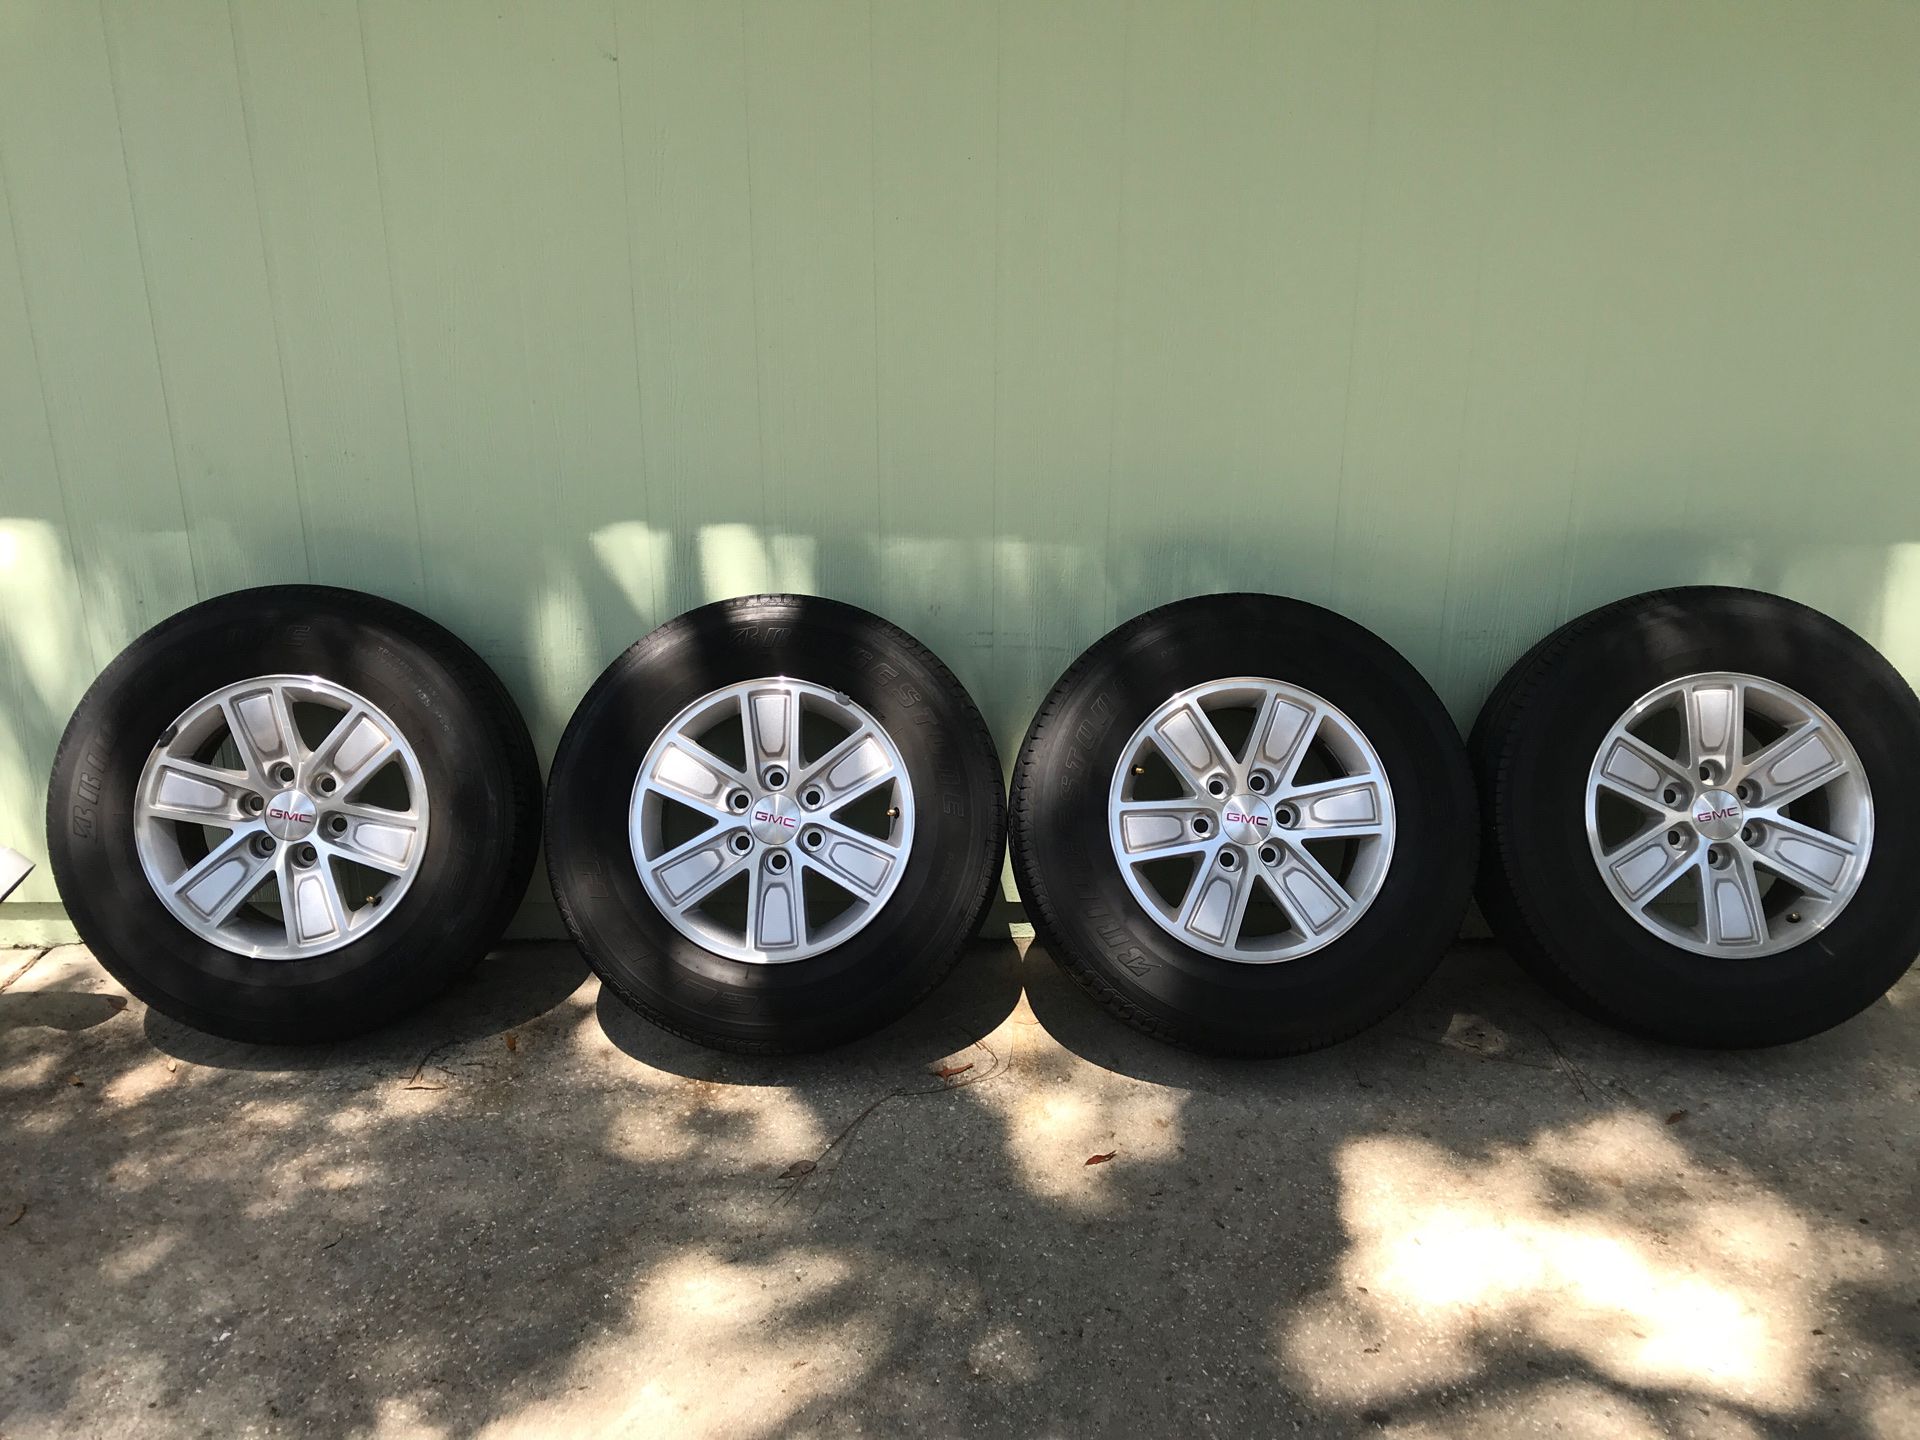 4stock gmc rims and tires 6 lug plus spare and lug nuts